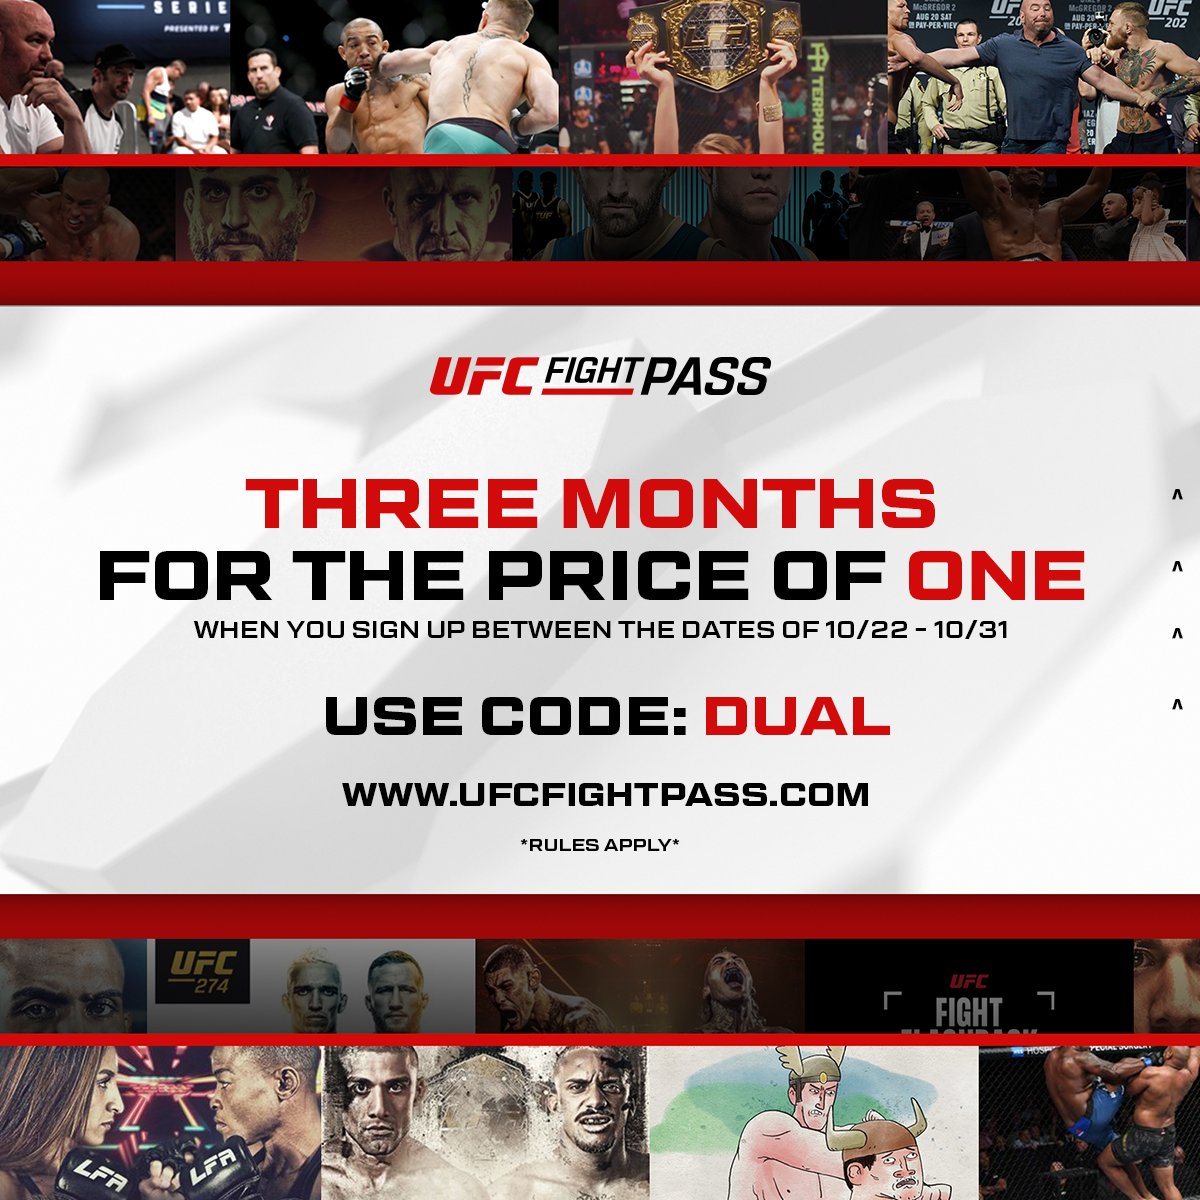 Three months for price of one offer for @UFCFightPass.

With launch of @cffcmatchday day scheduled for Nov. 1, you can get full season of @NCAAWrestling events (and everything else on the platform) at this rate using code 'DUAL' if you sign up between Oct. 22-31.

#GrowTheSport